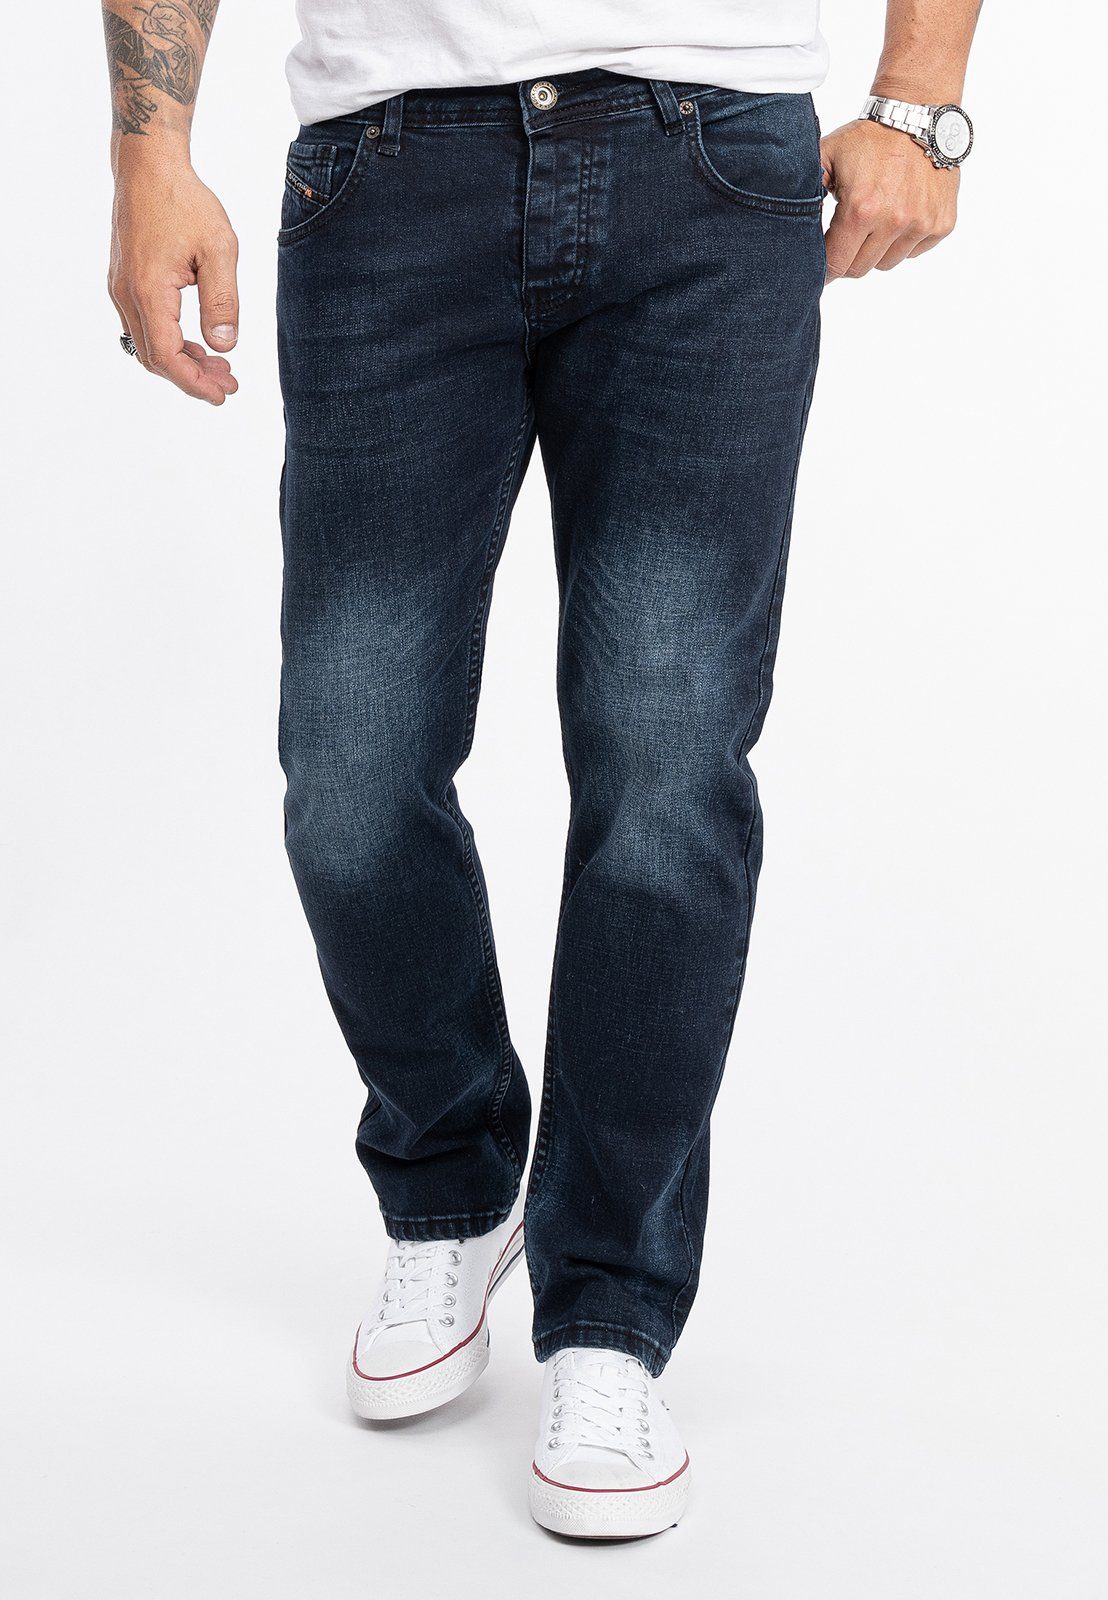 Rock Creek Straight-Jeans Herren Jeans Stonewashed Blau RC-2278 | Straight-Fit Jeans